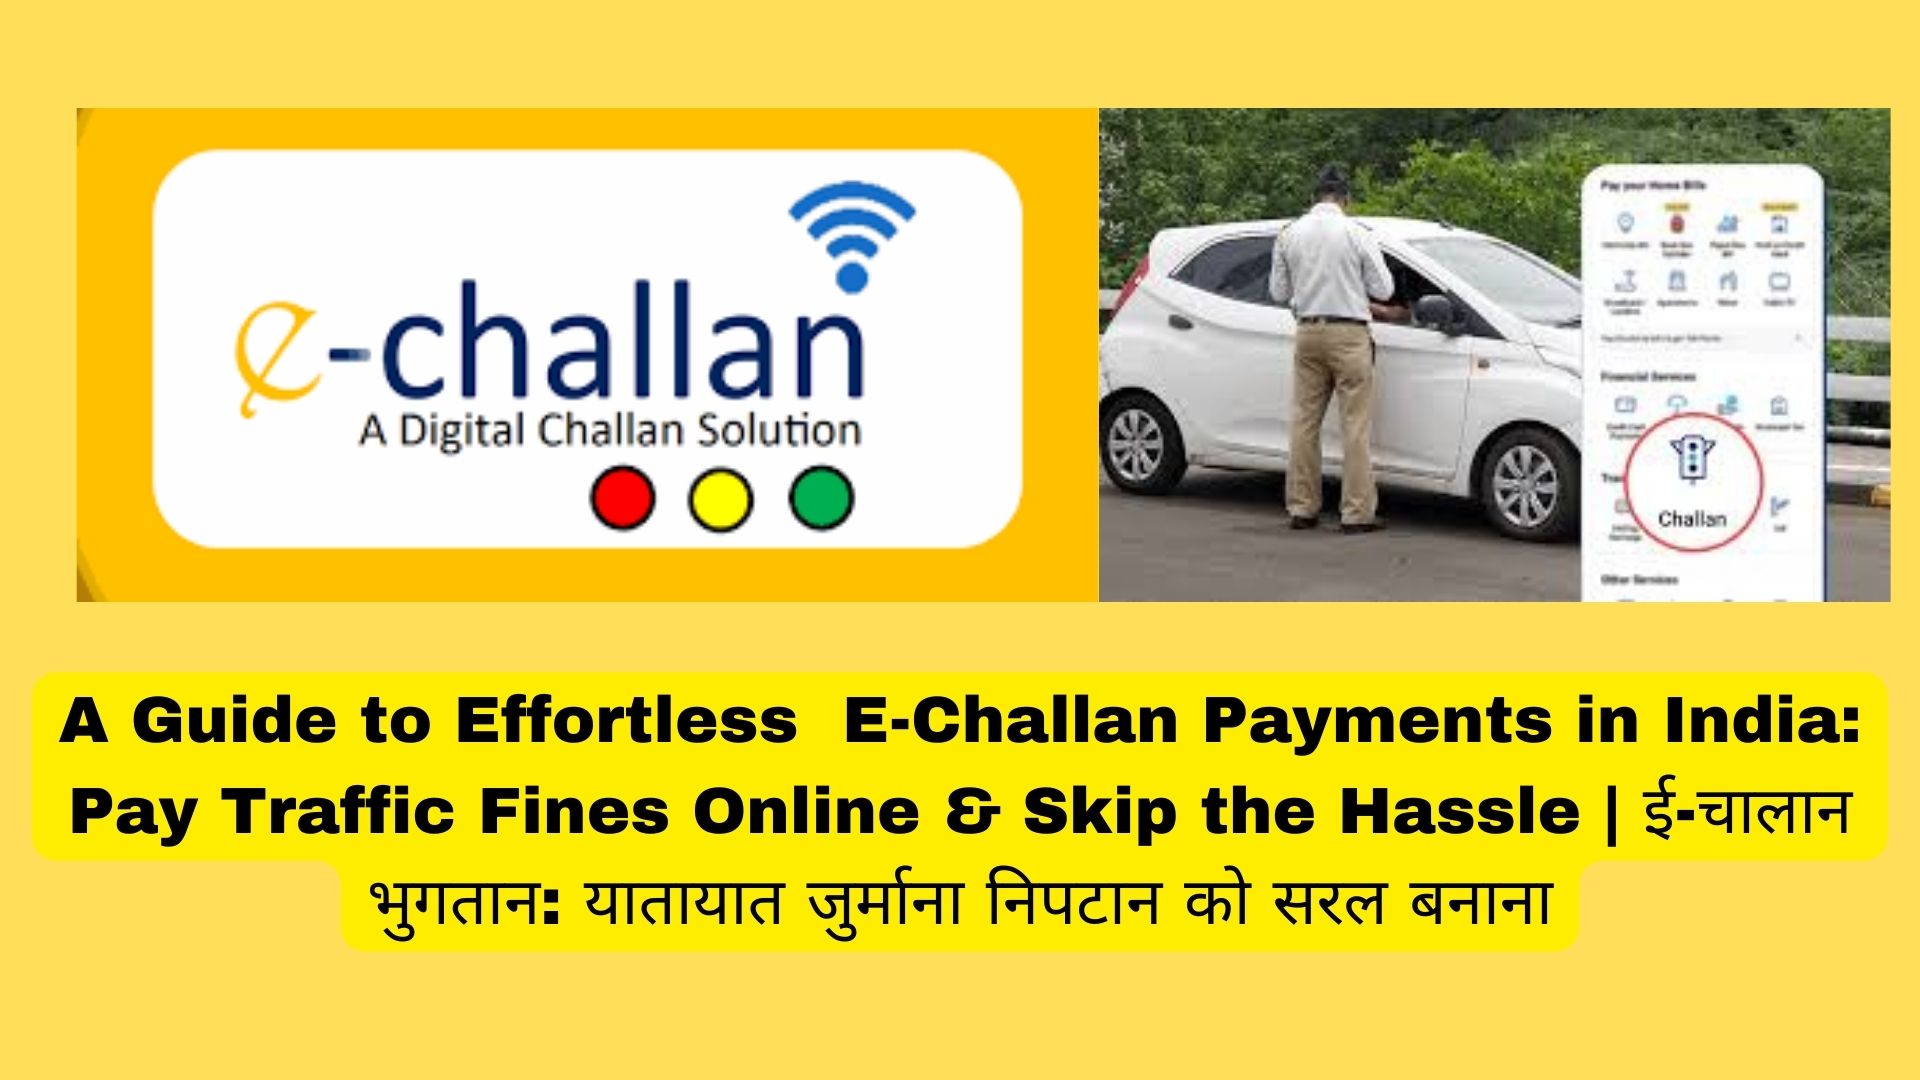 A Guide to Effortless E-Challan Payments in India: Pay Traffic Fines Online & Skip the Hassle | ई-चालान भुगतान: यातायात जुर्माना निपटान को सरल बनाना